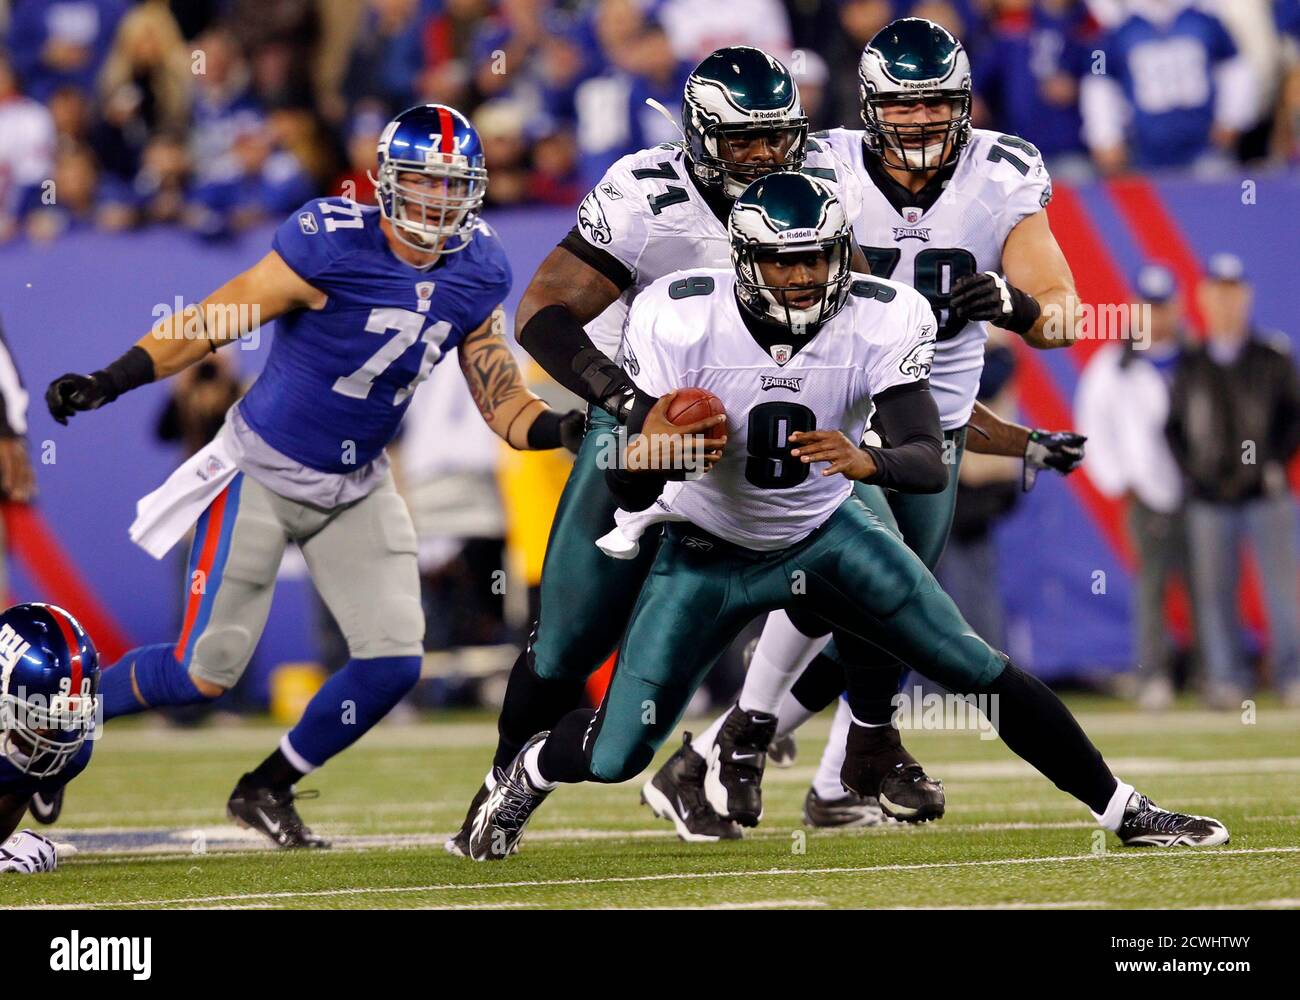 Philadelphia Eagles quarterback Vince Young (8) runs downfield in the first  quarter of their NFL football game against the New York Giants in East  Rutherford, New Jersey, November 20, 2011. At left